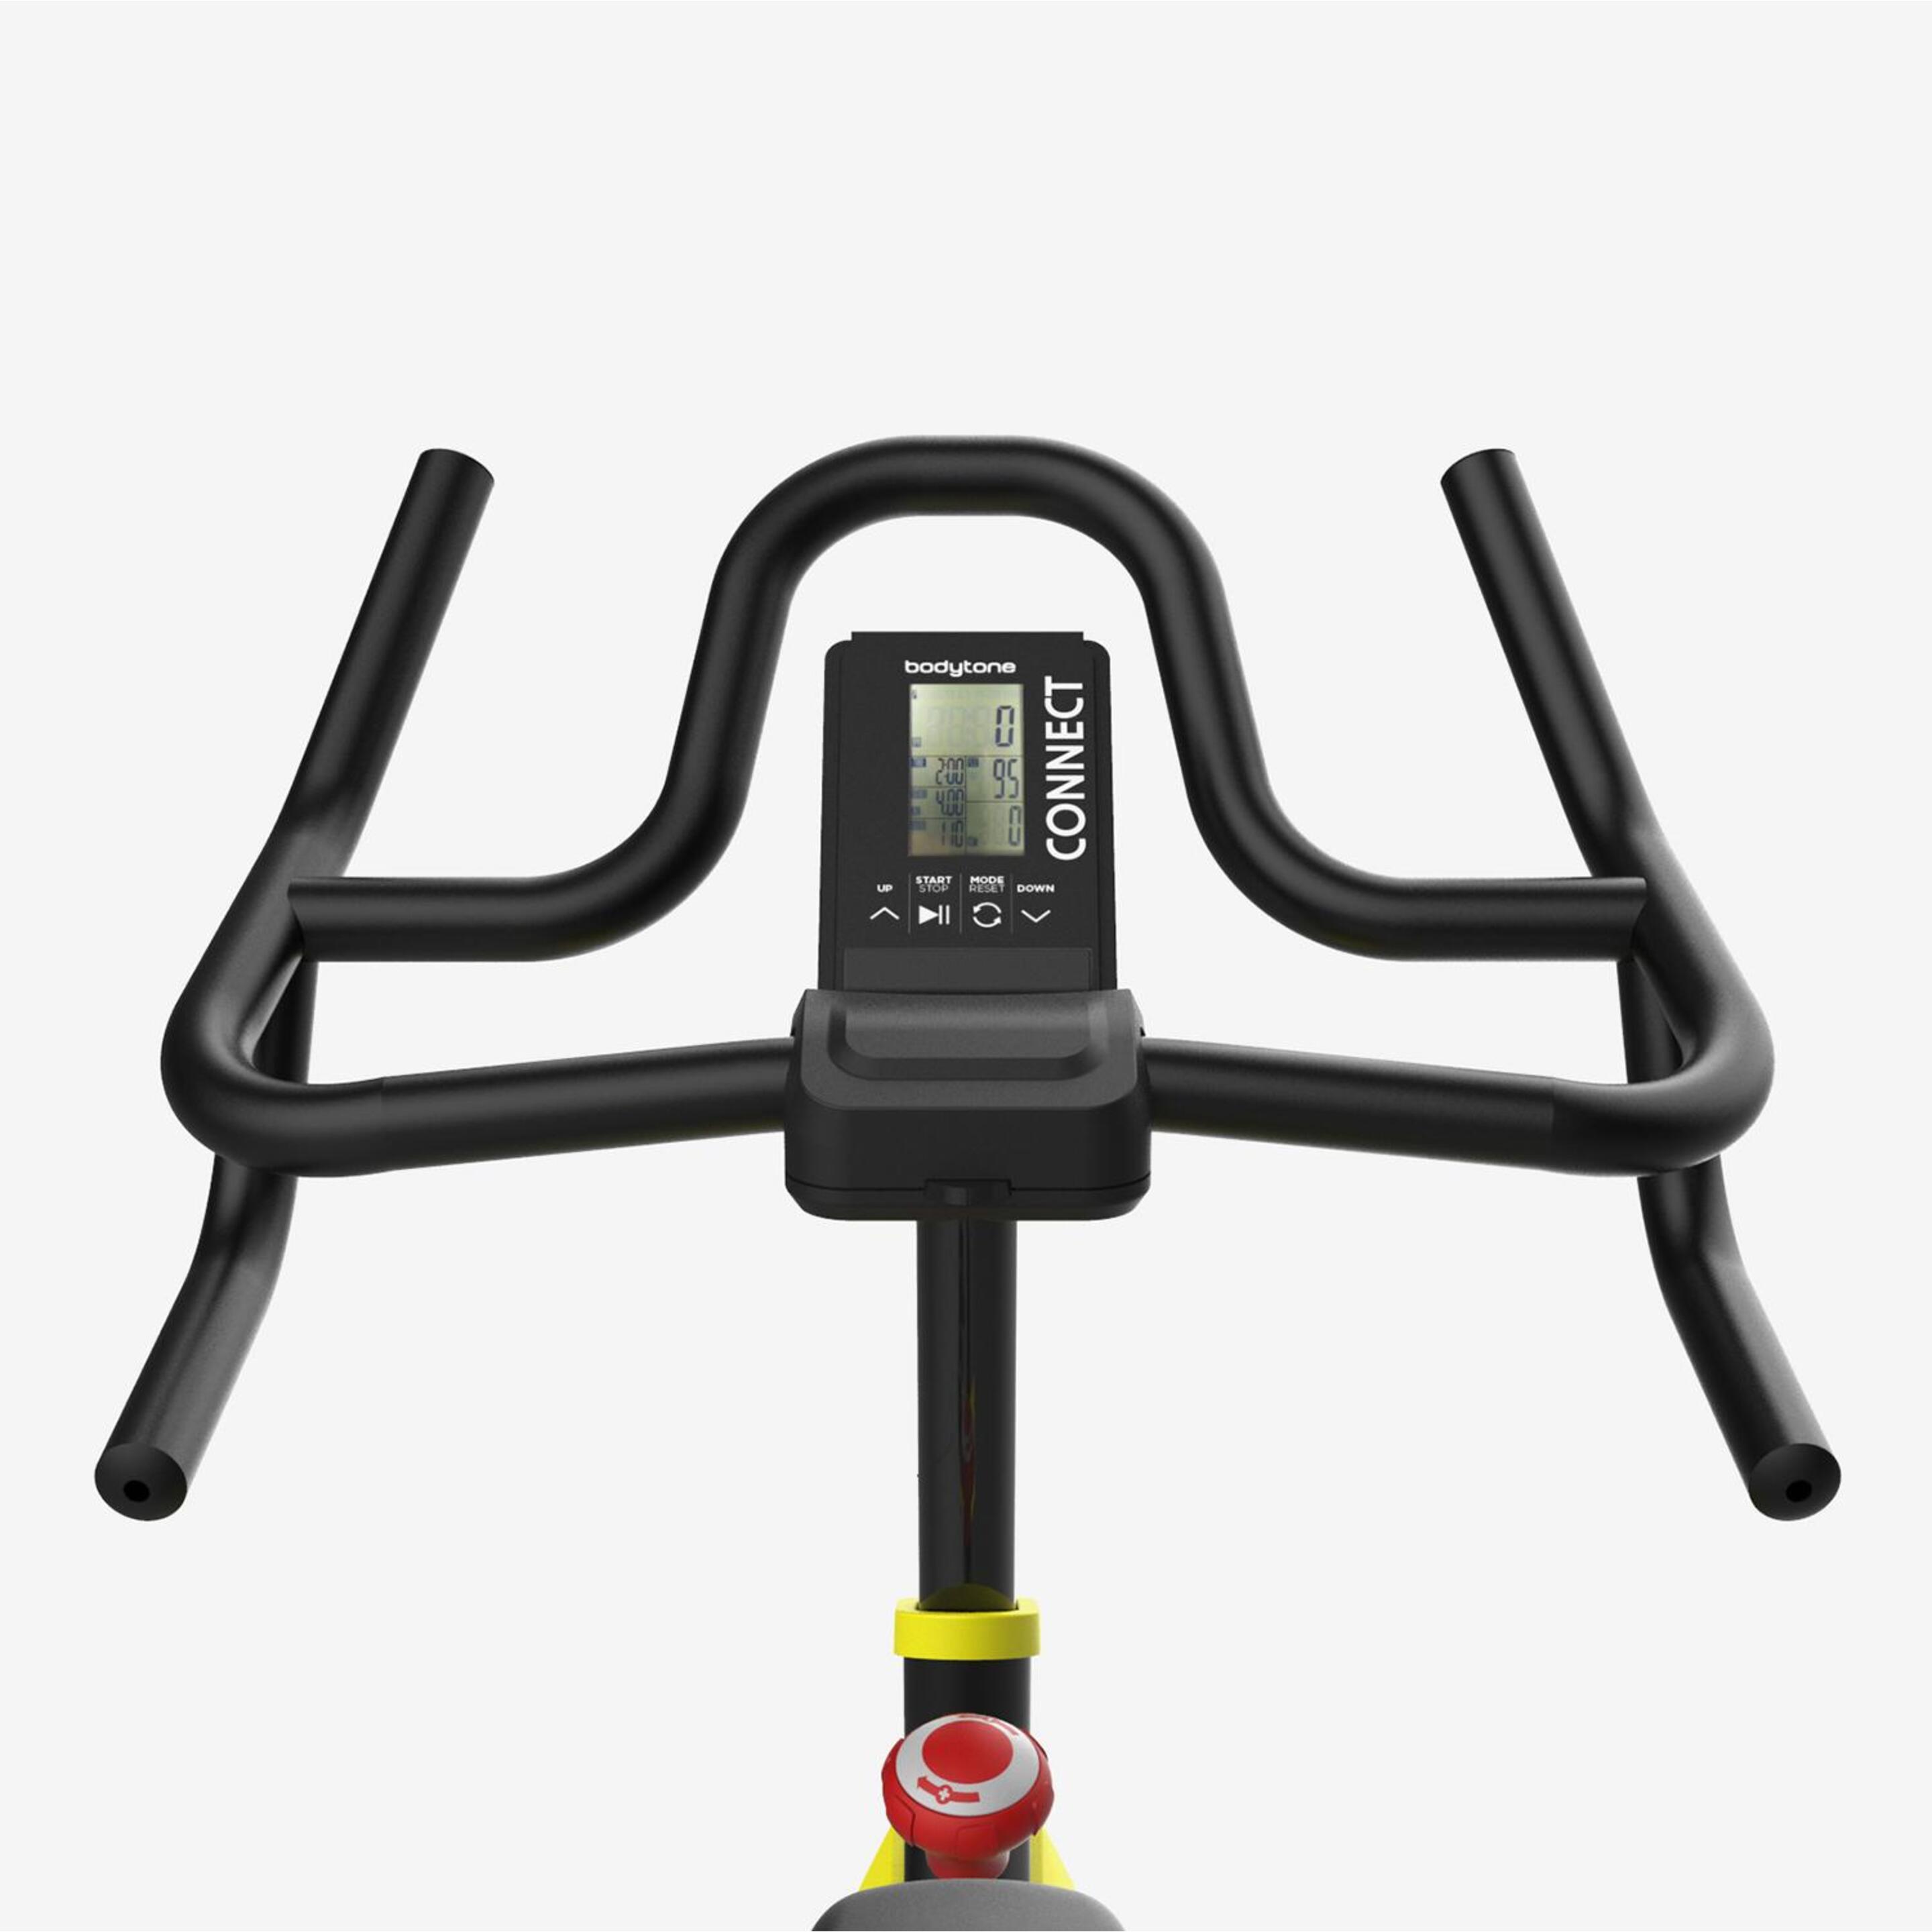 Bodytone Active Connect 200